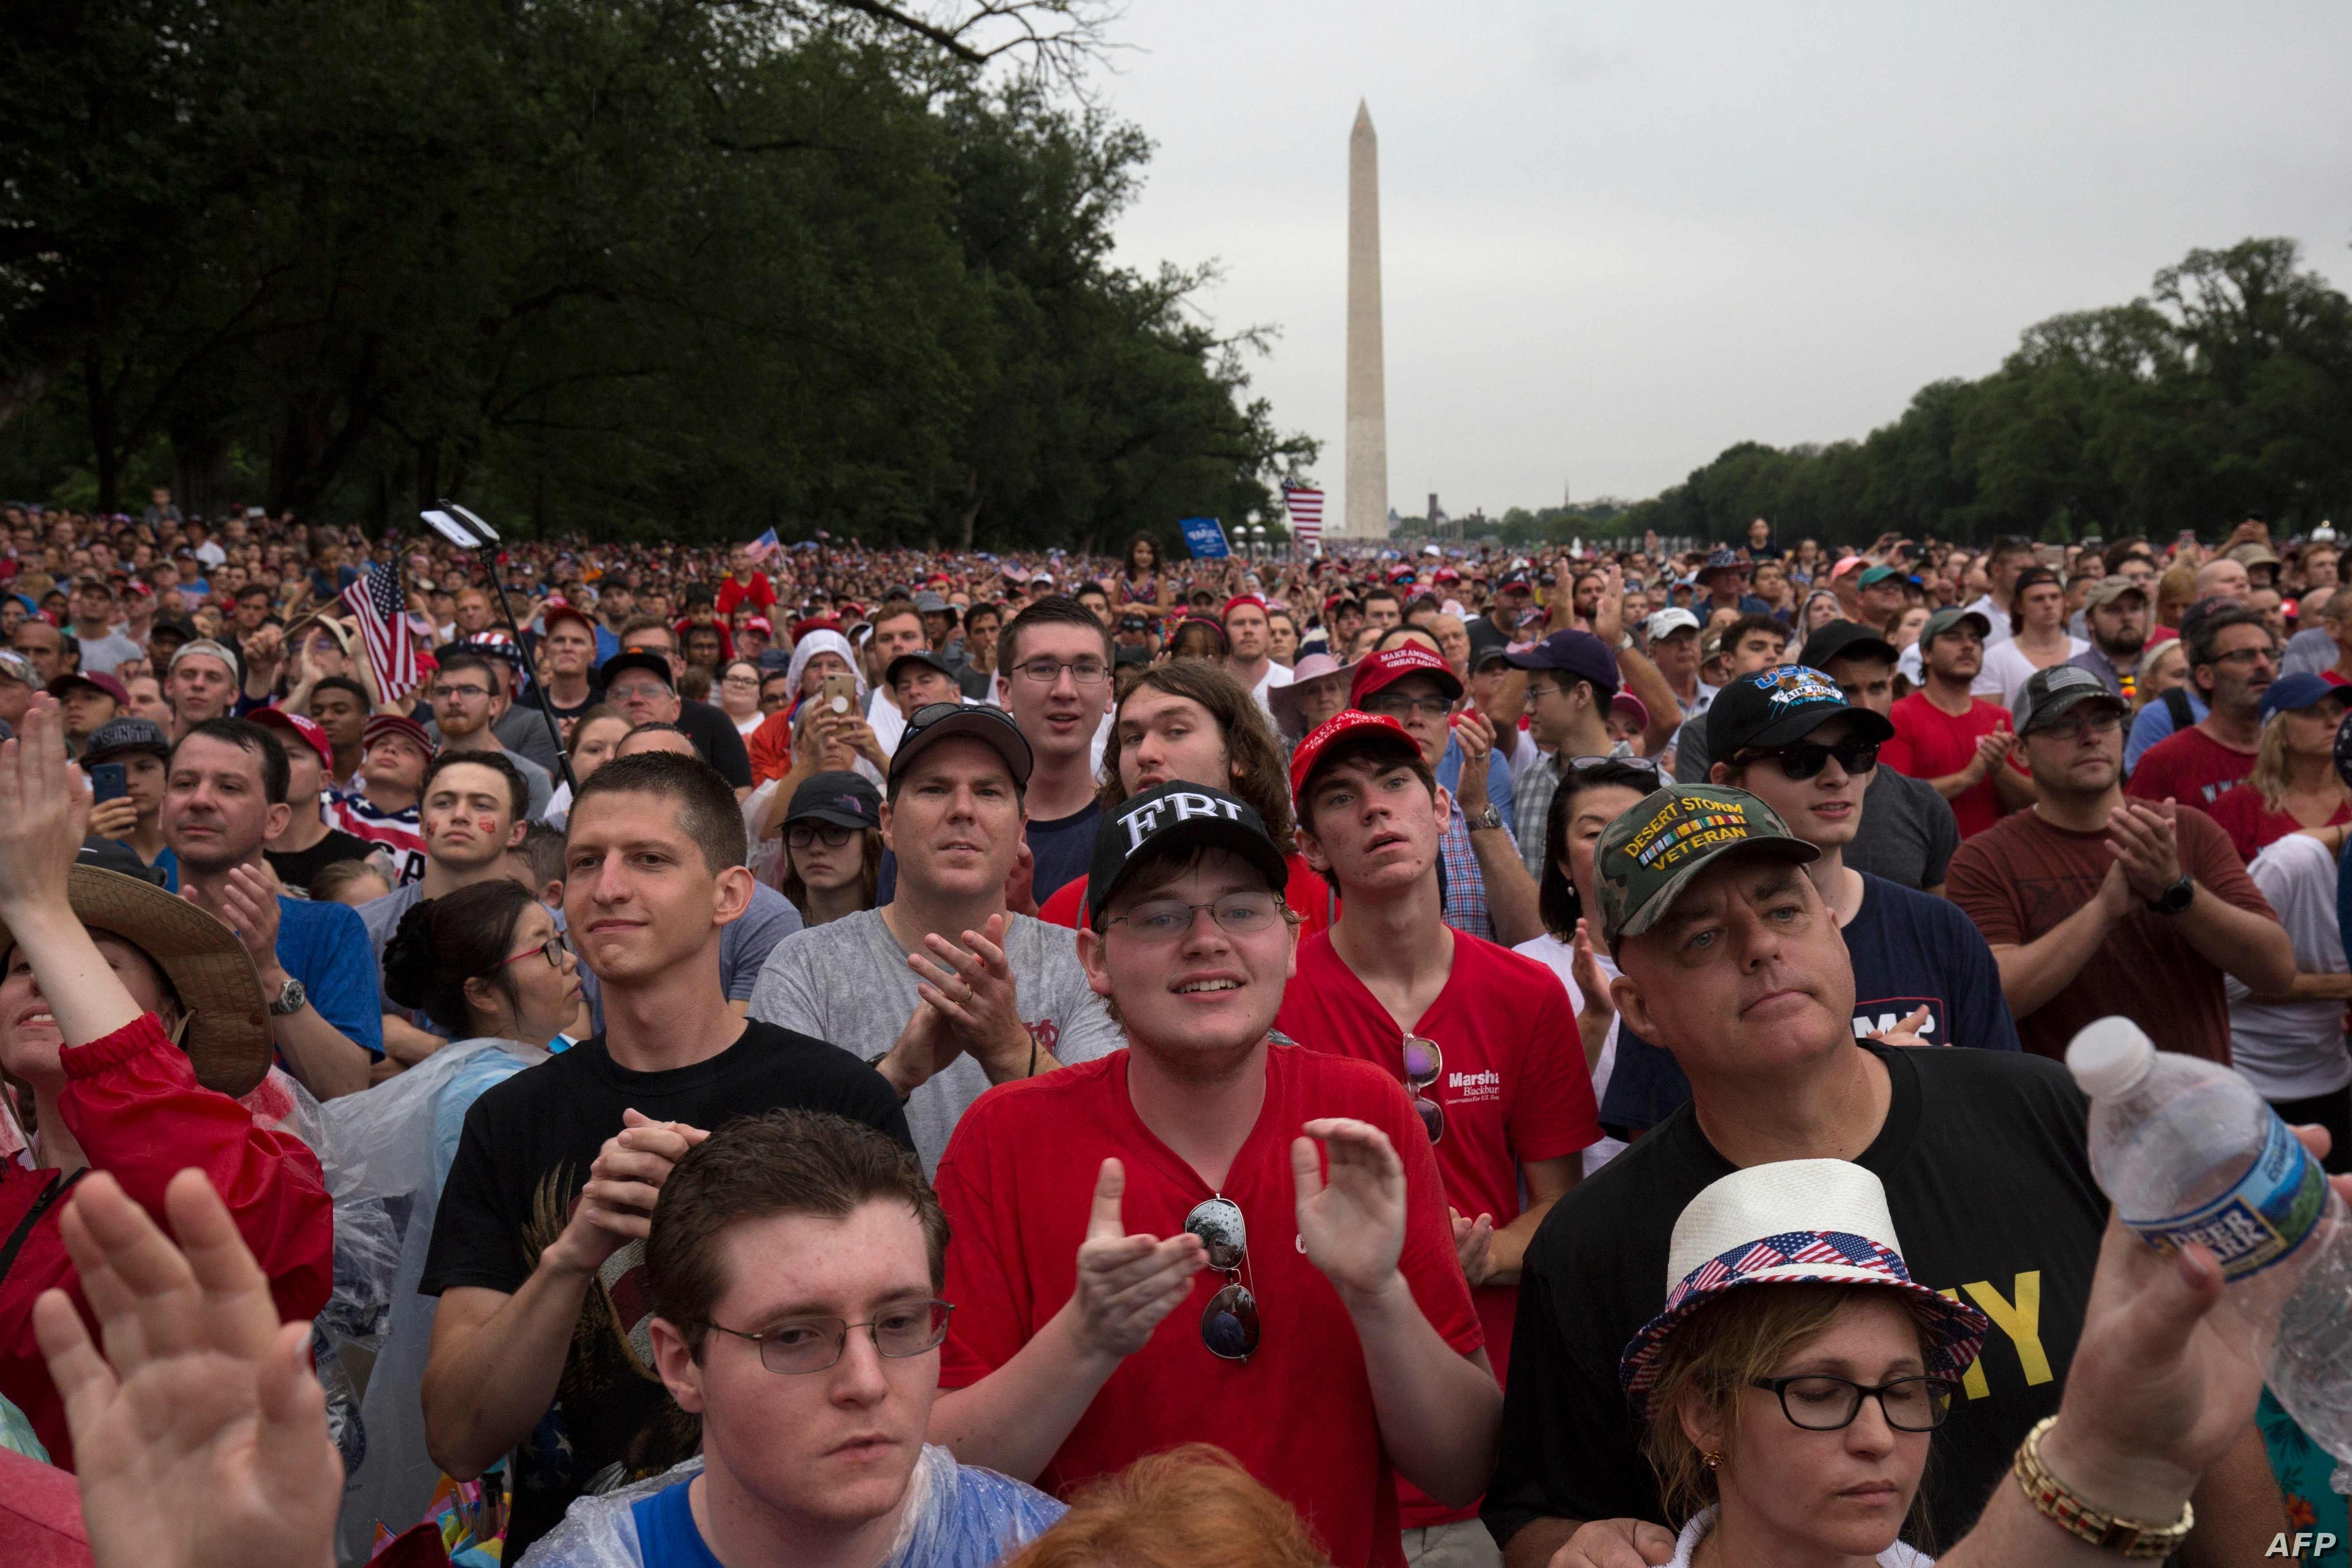  People gather on the National Mall during the 